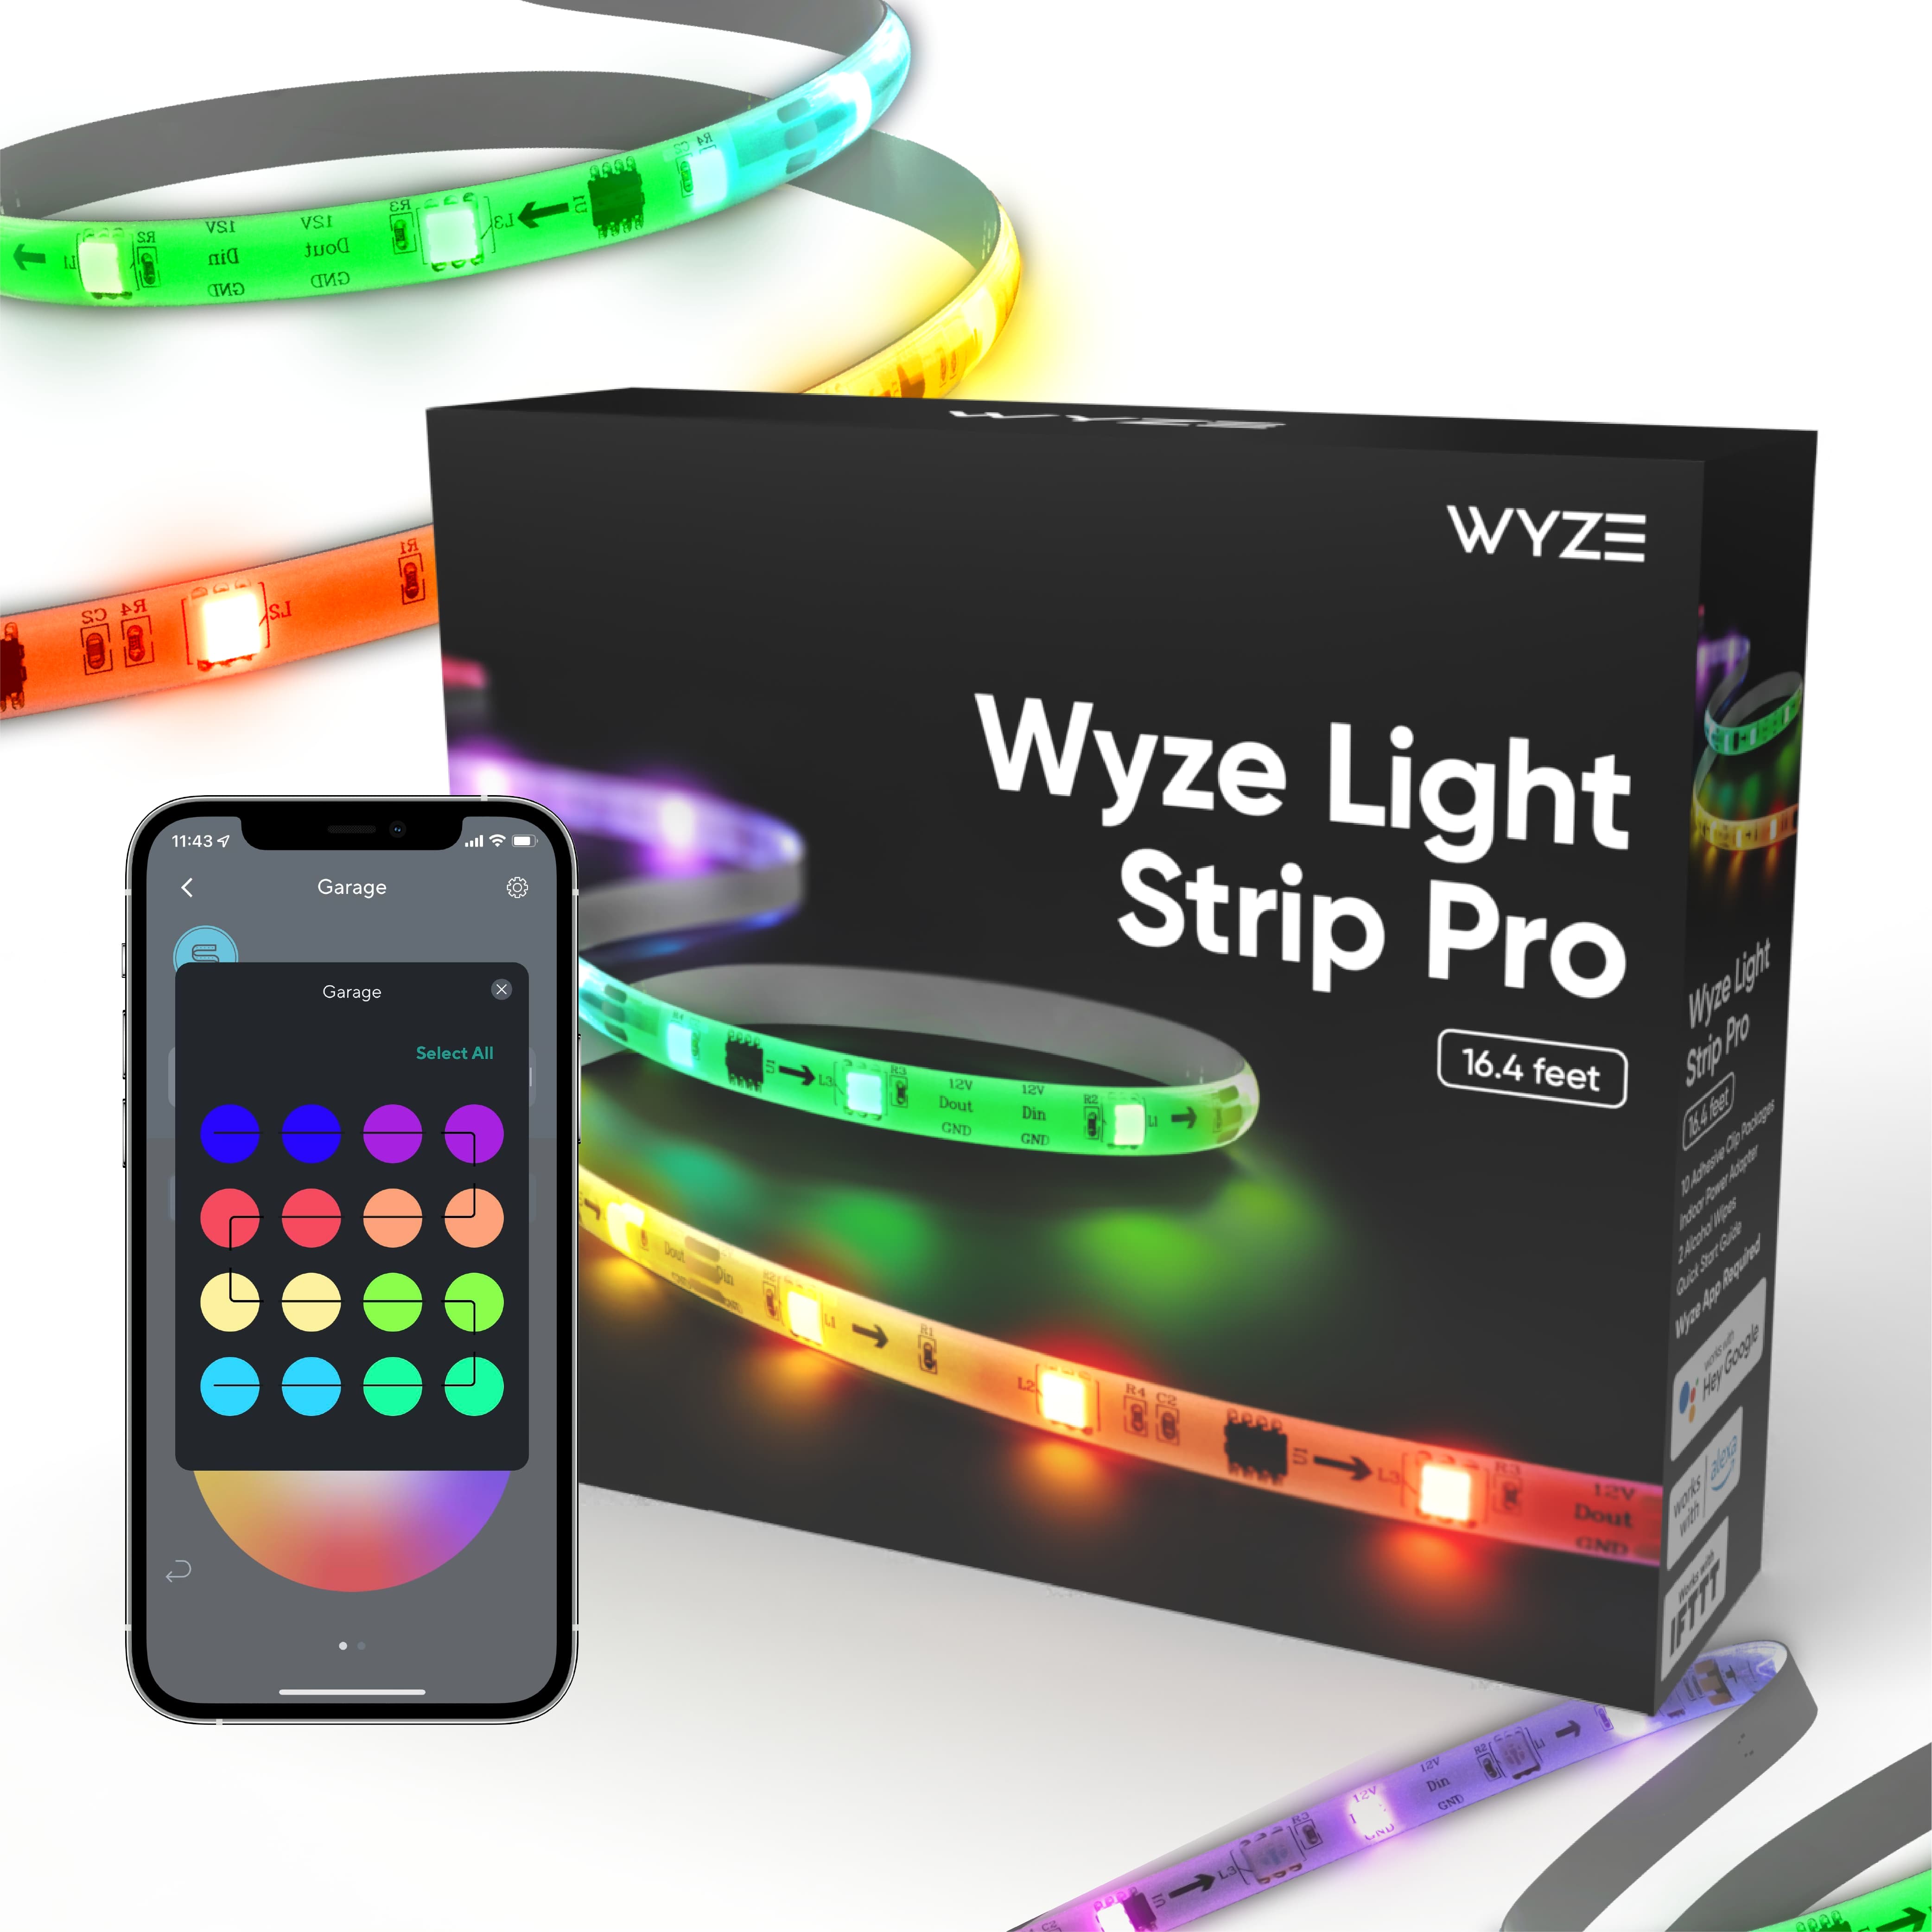 Wyze Light Strip Pro For Kitchen, TV, Bathroom, and More – Wyze Labs, Inc